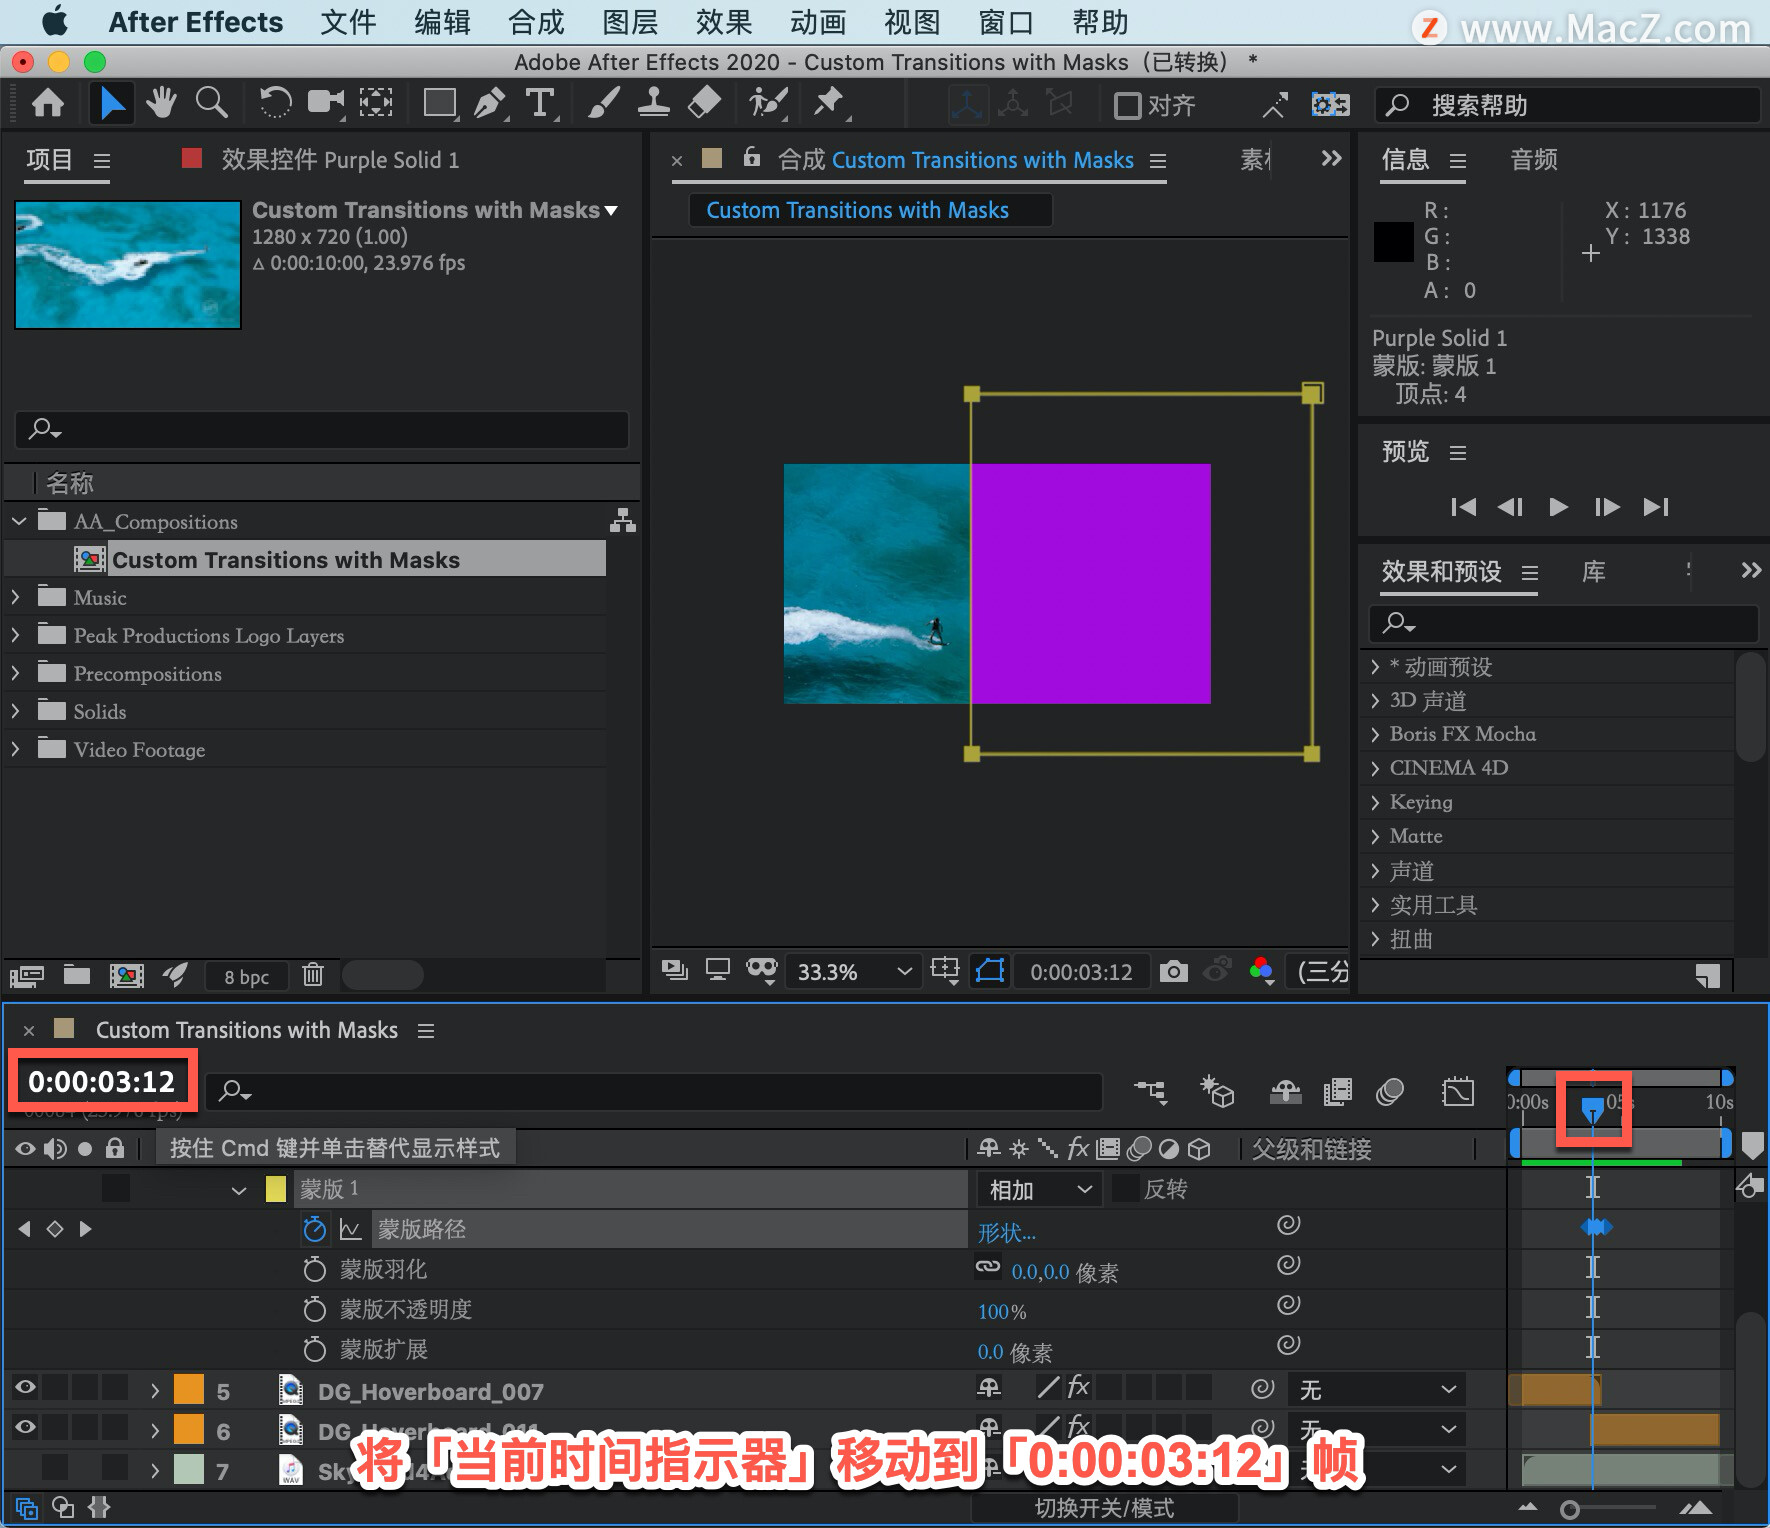 After Effects 教程「26」，如何在 After Effects 中创建两个蒙版动画？